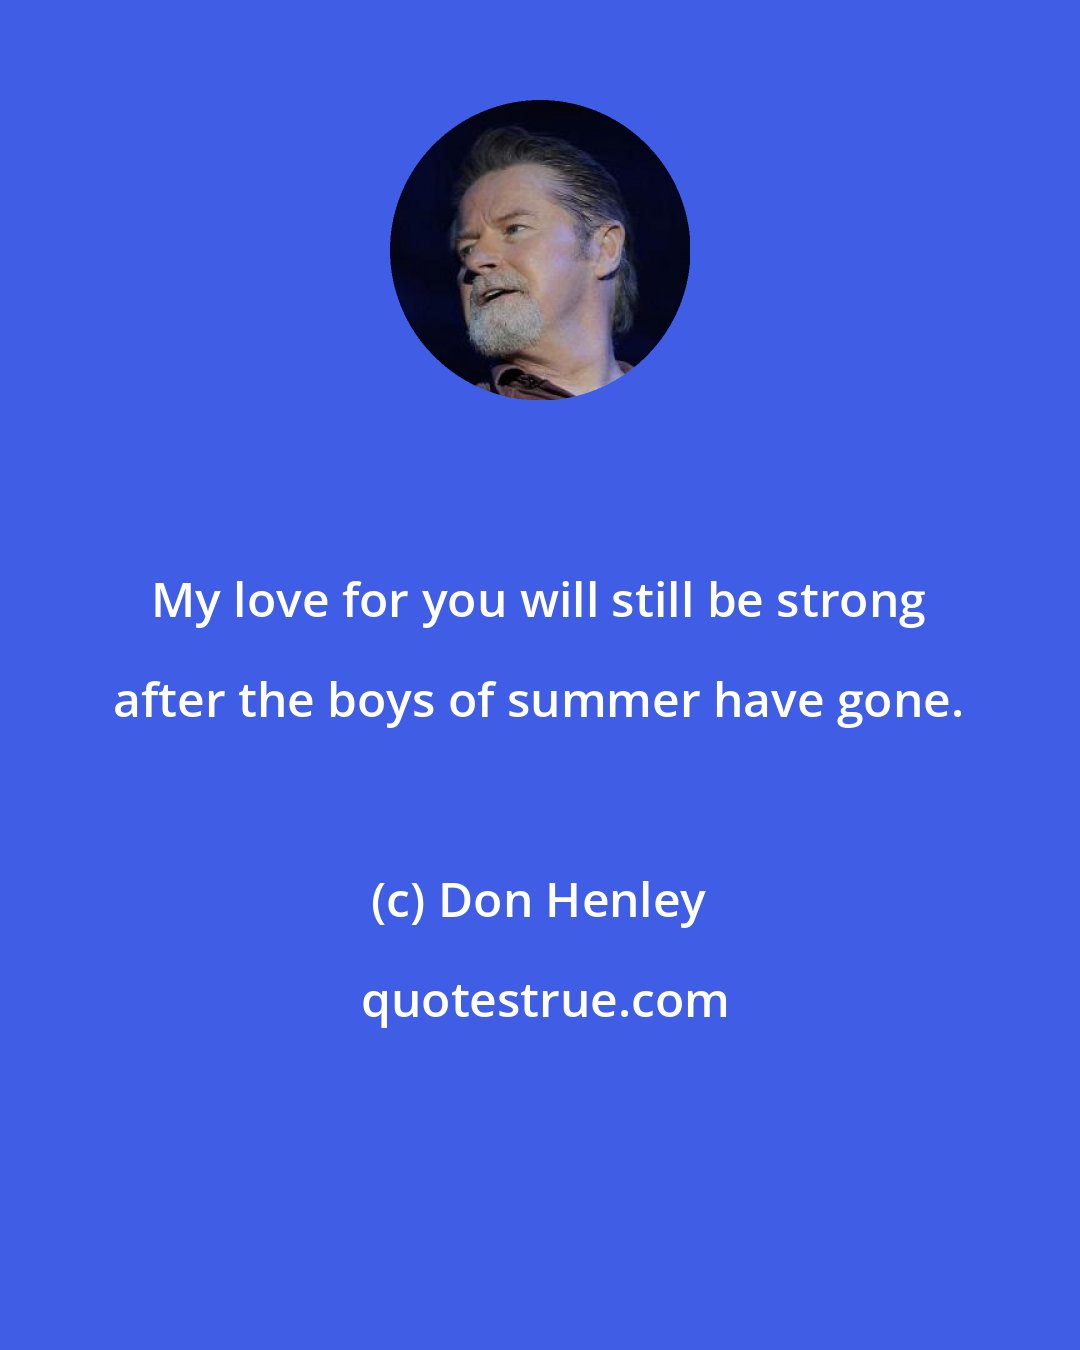 Don Henley: My love for you will still be strong after the boys of summer have gone.